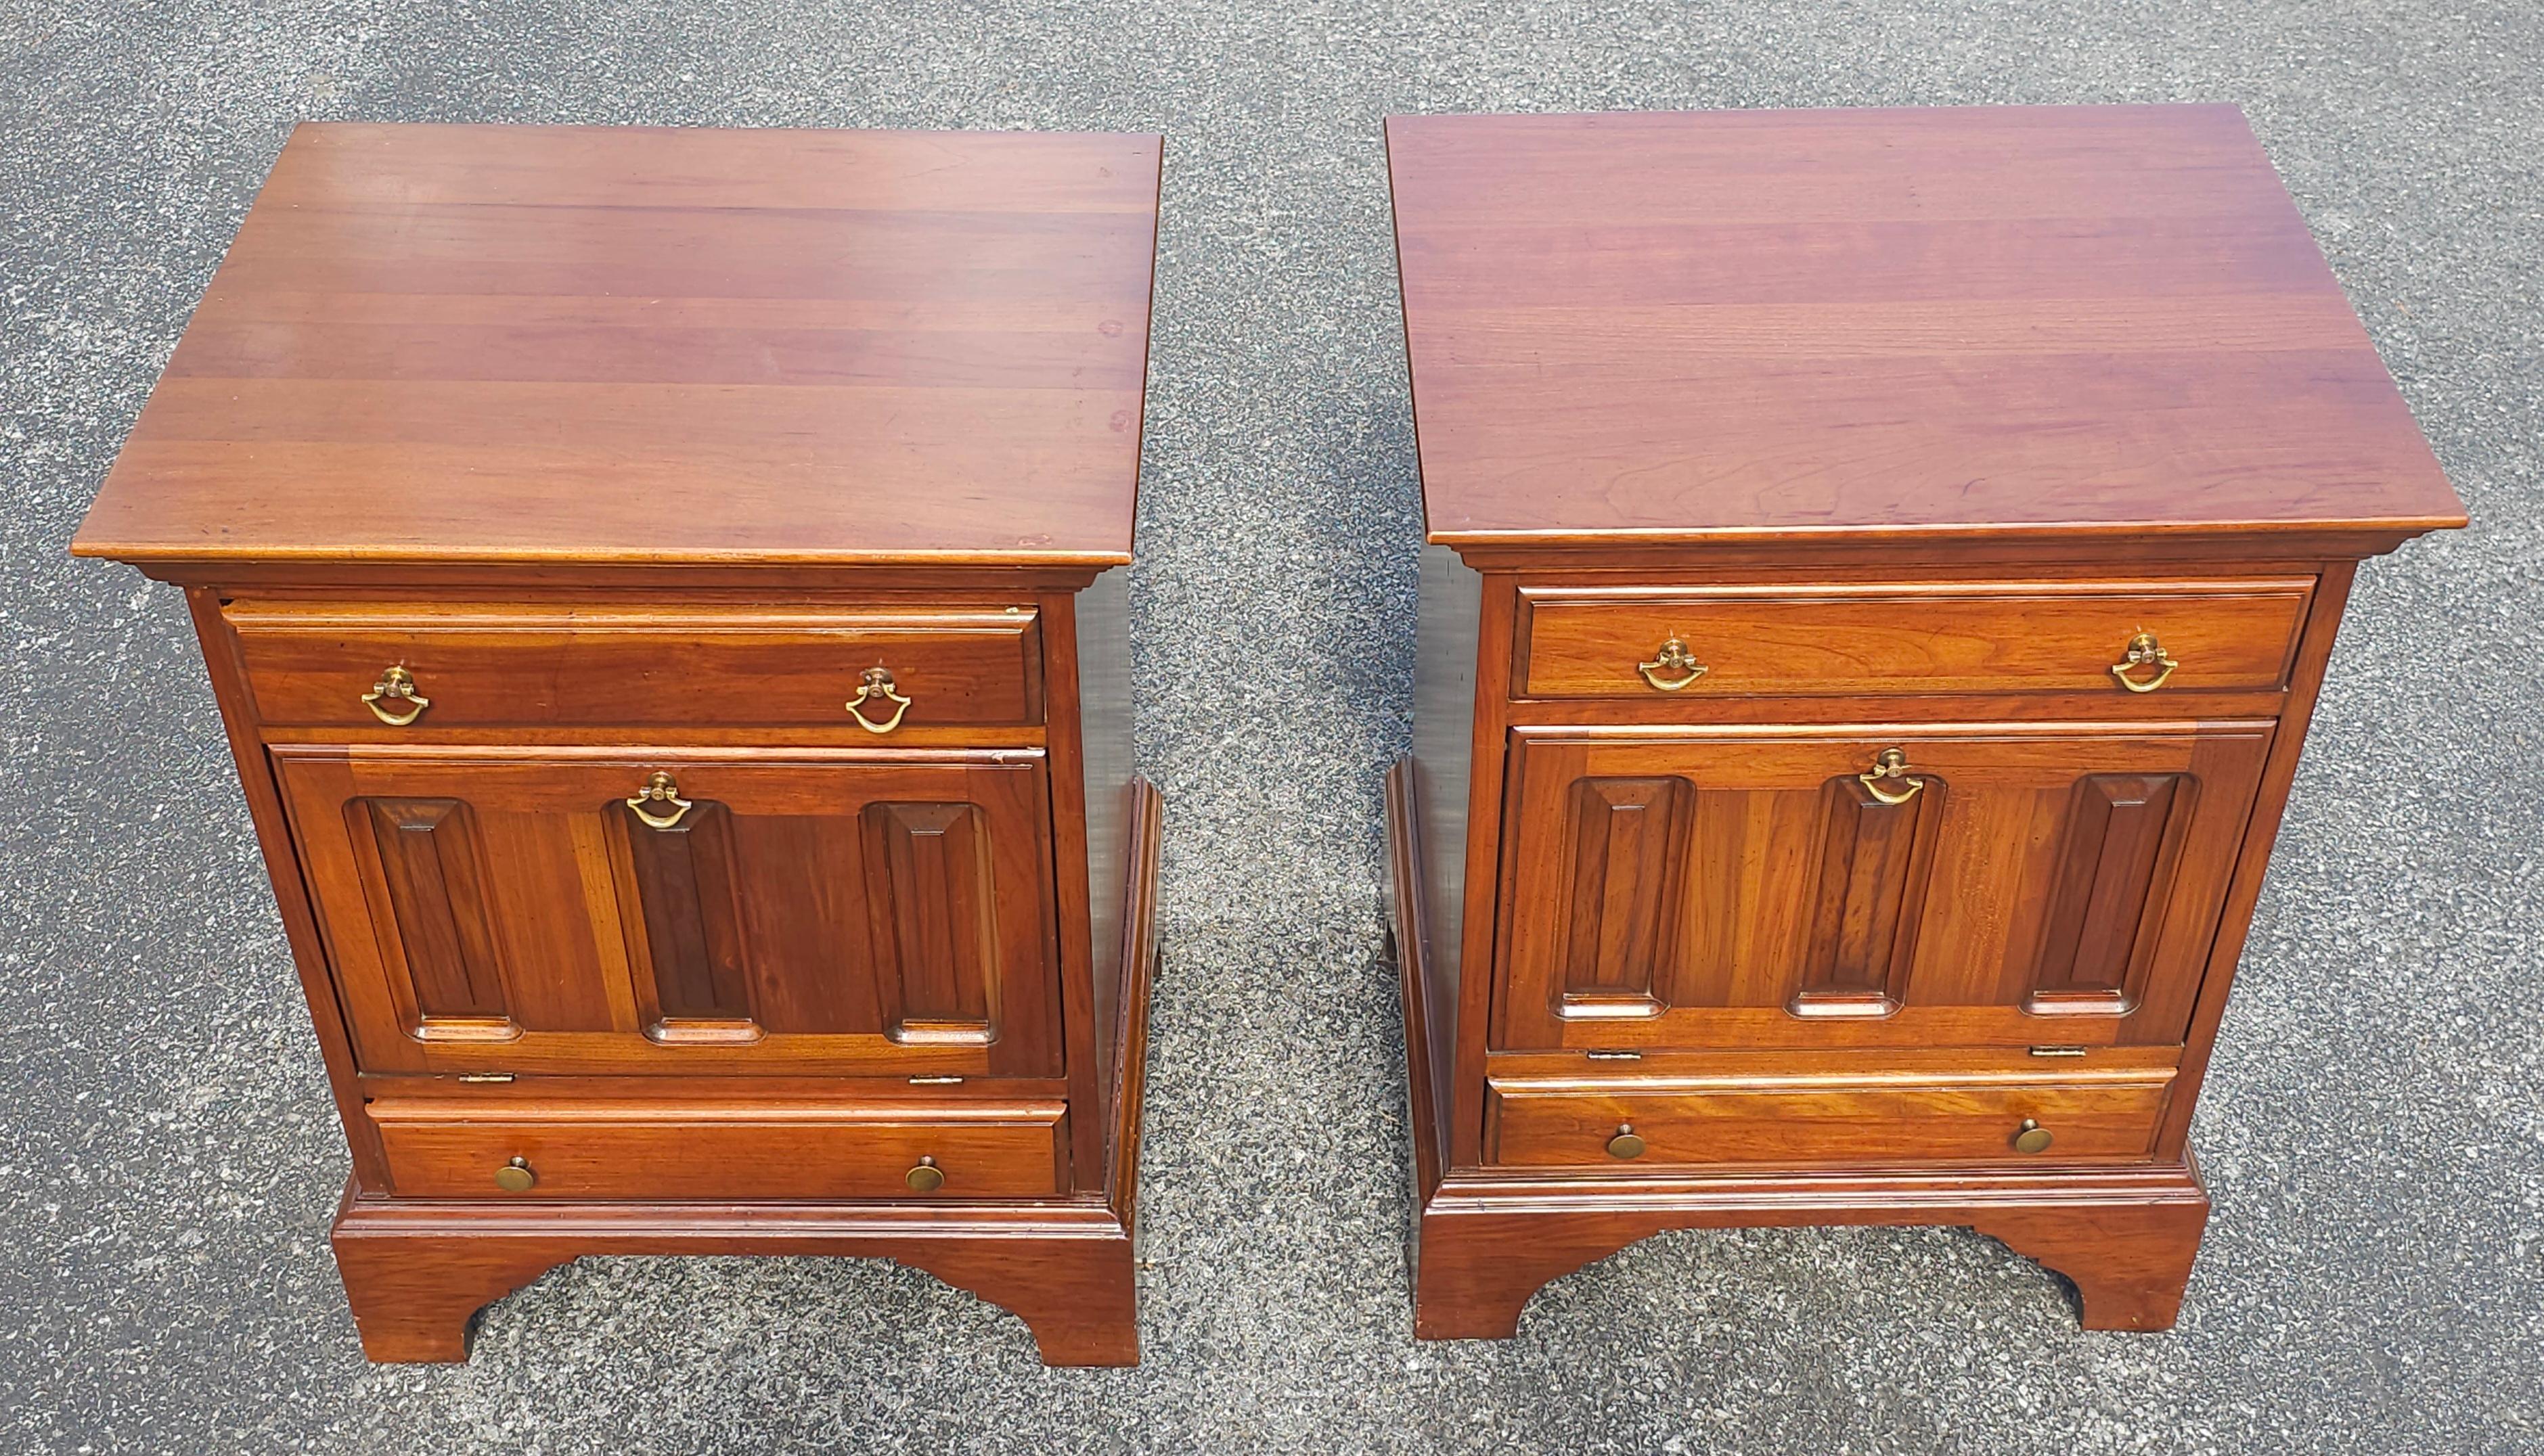 20th Century David Cabinet Cherry 2-Drawer a Abattant Door Bedside Cabinets Pair For Sale 8